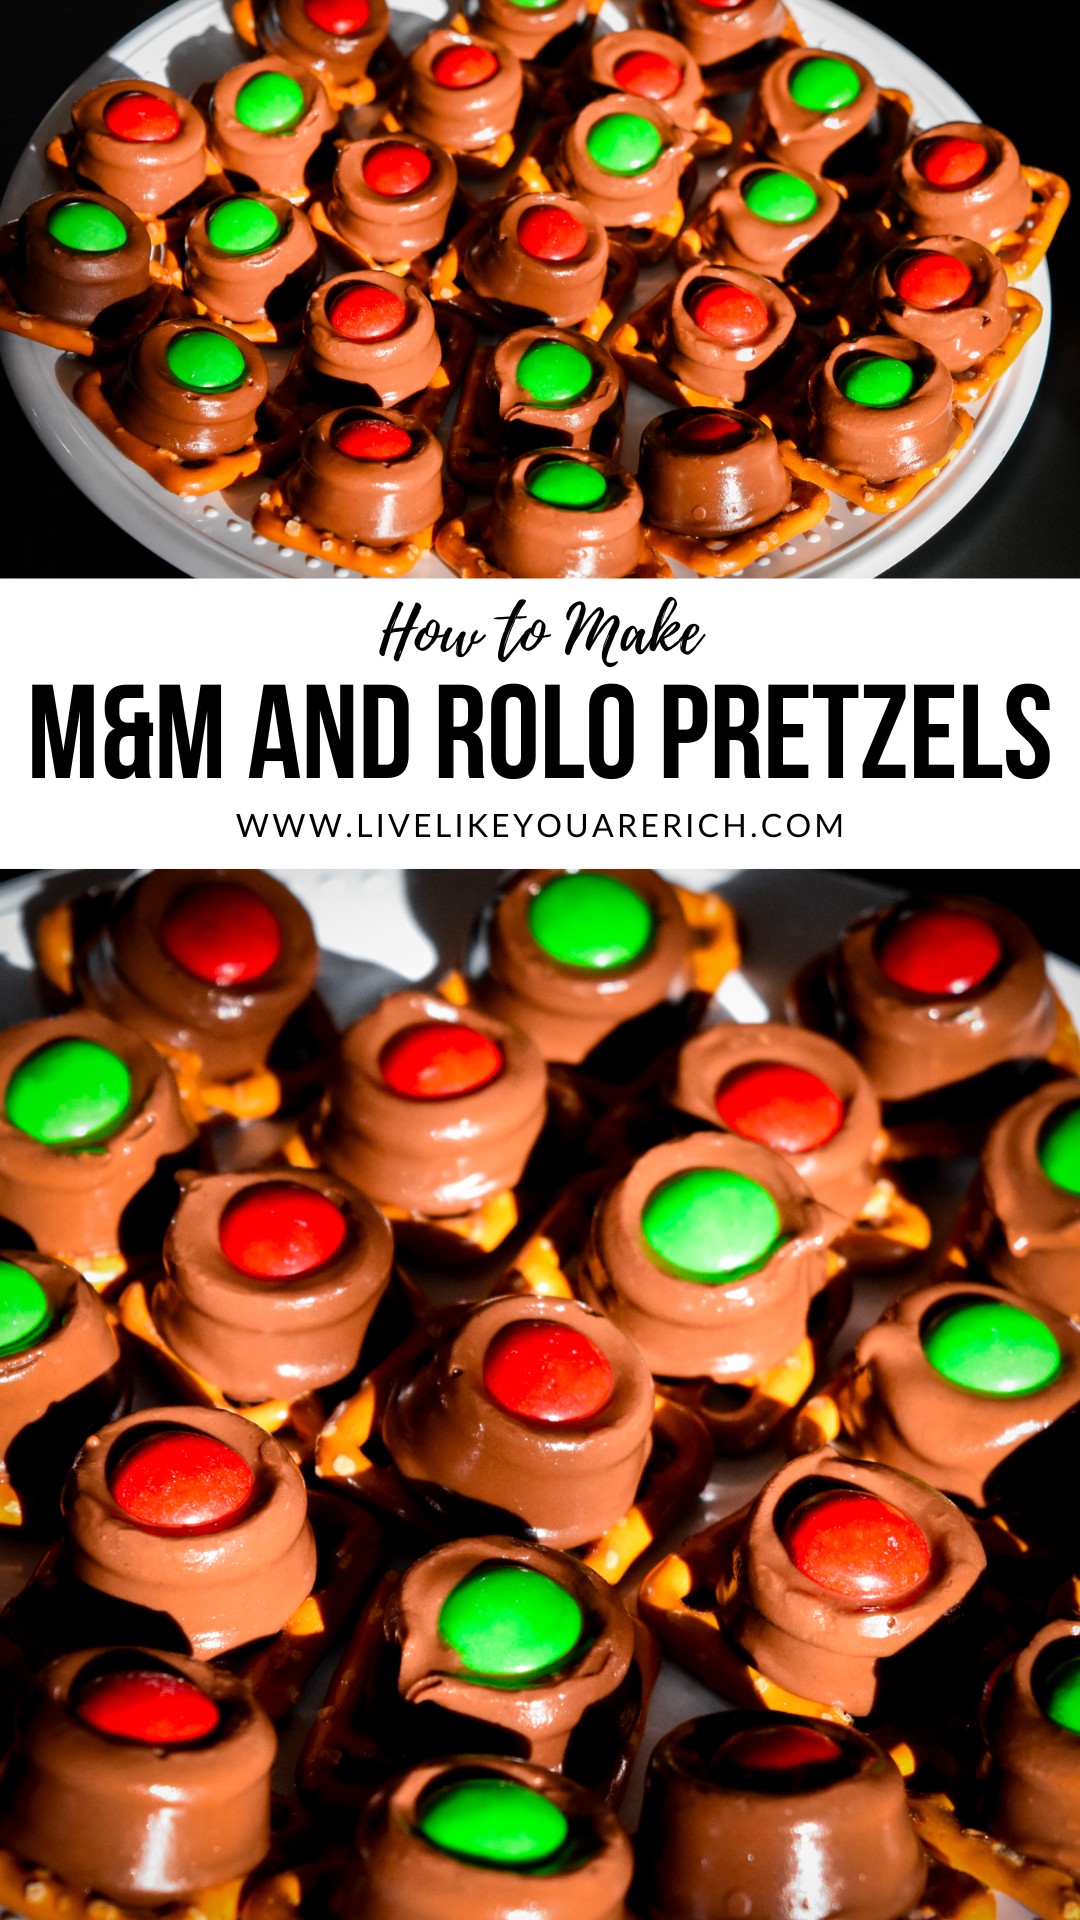 How to Make M&M and Rolo Pretzels